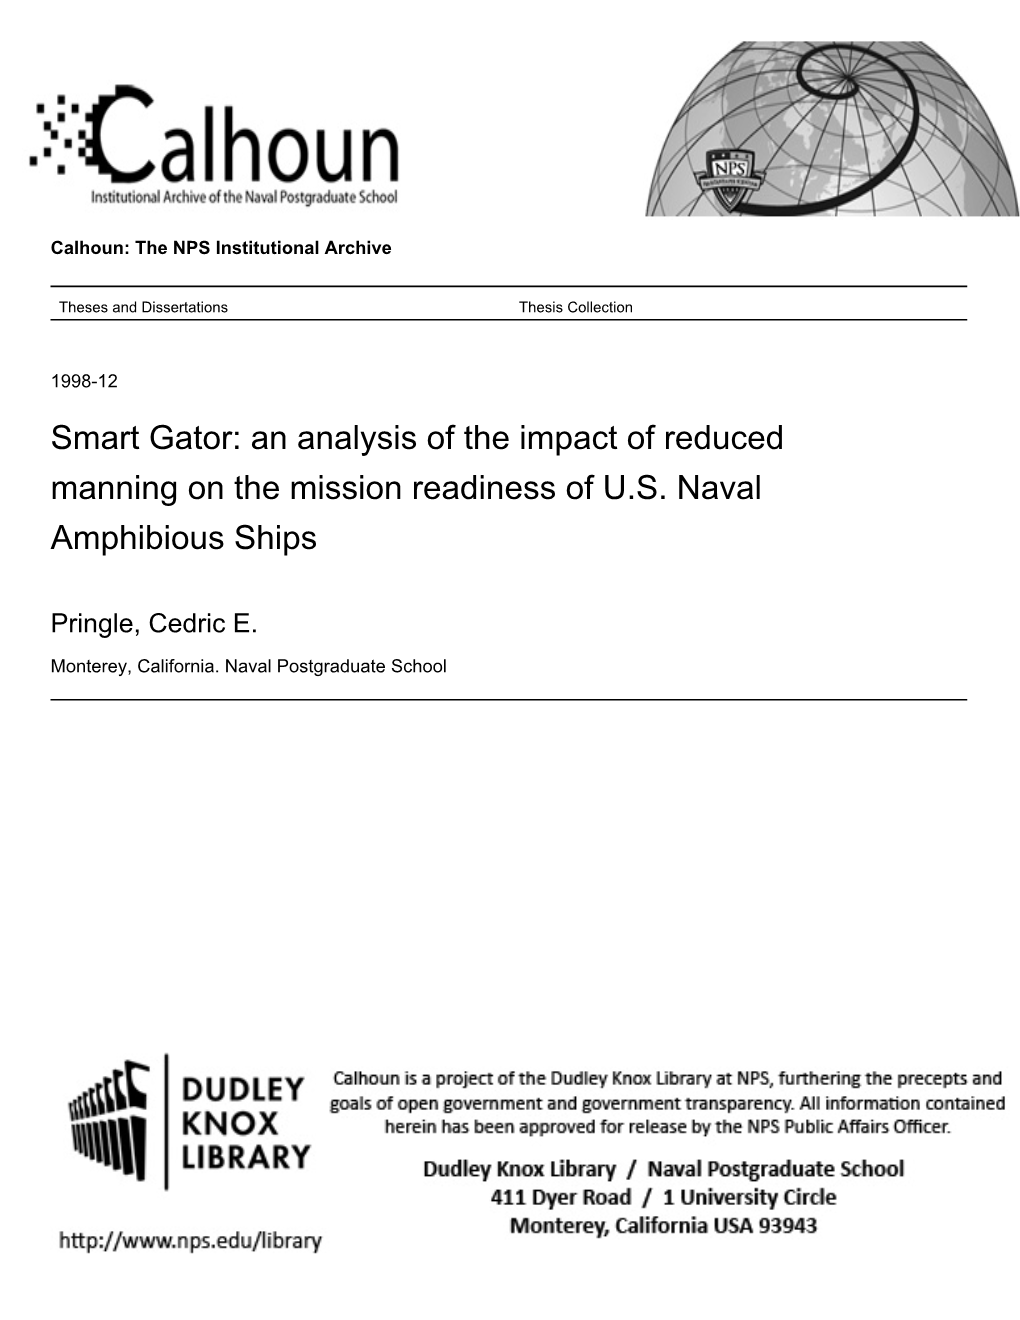 Smart Gator: an Analysis of the Impact of Reduced Manning on the Mission Readiness of U.S